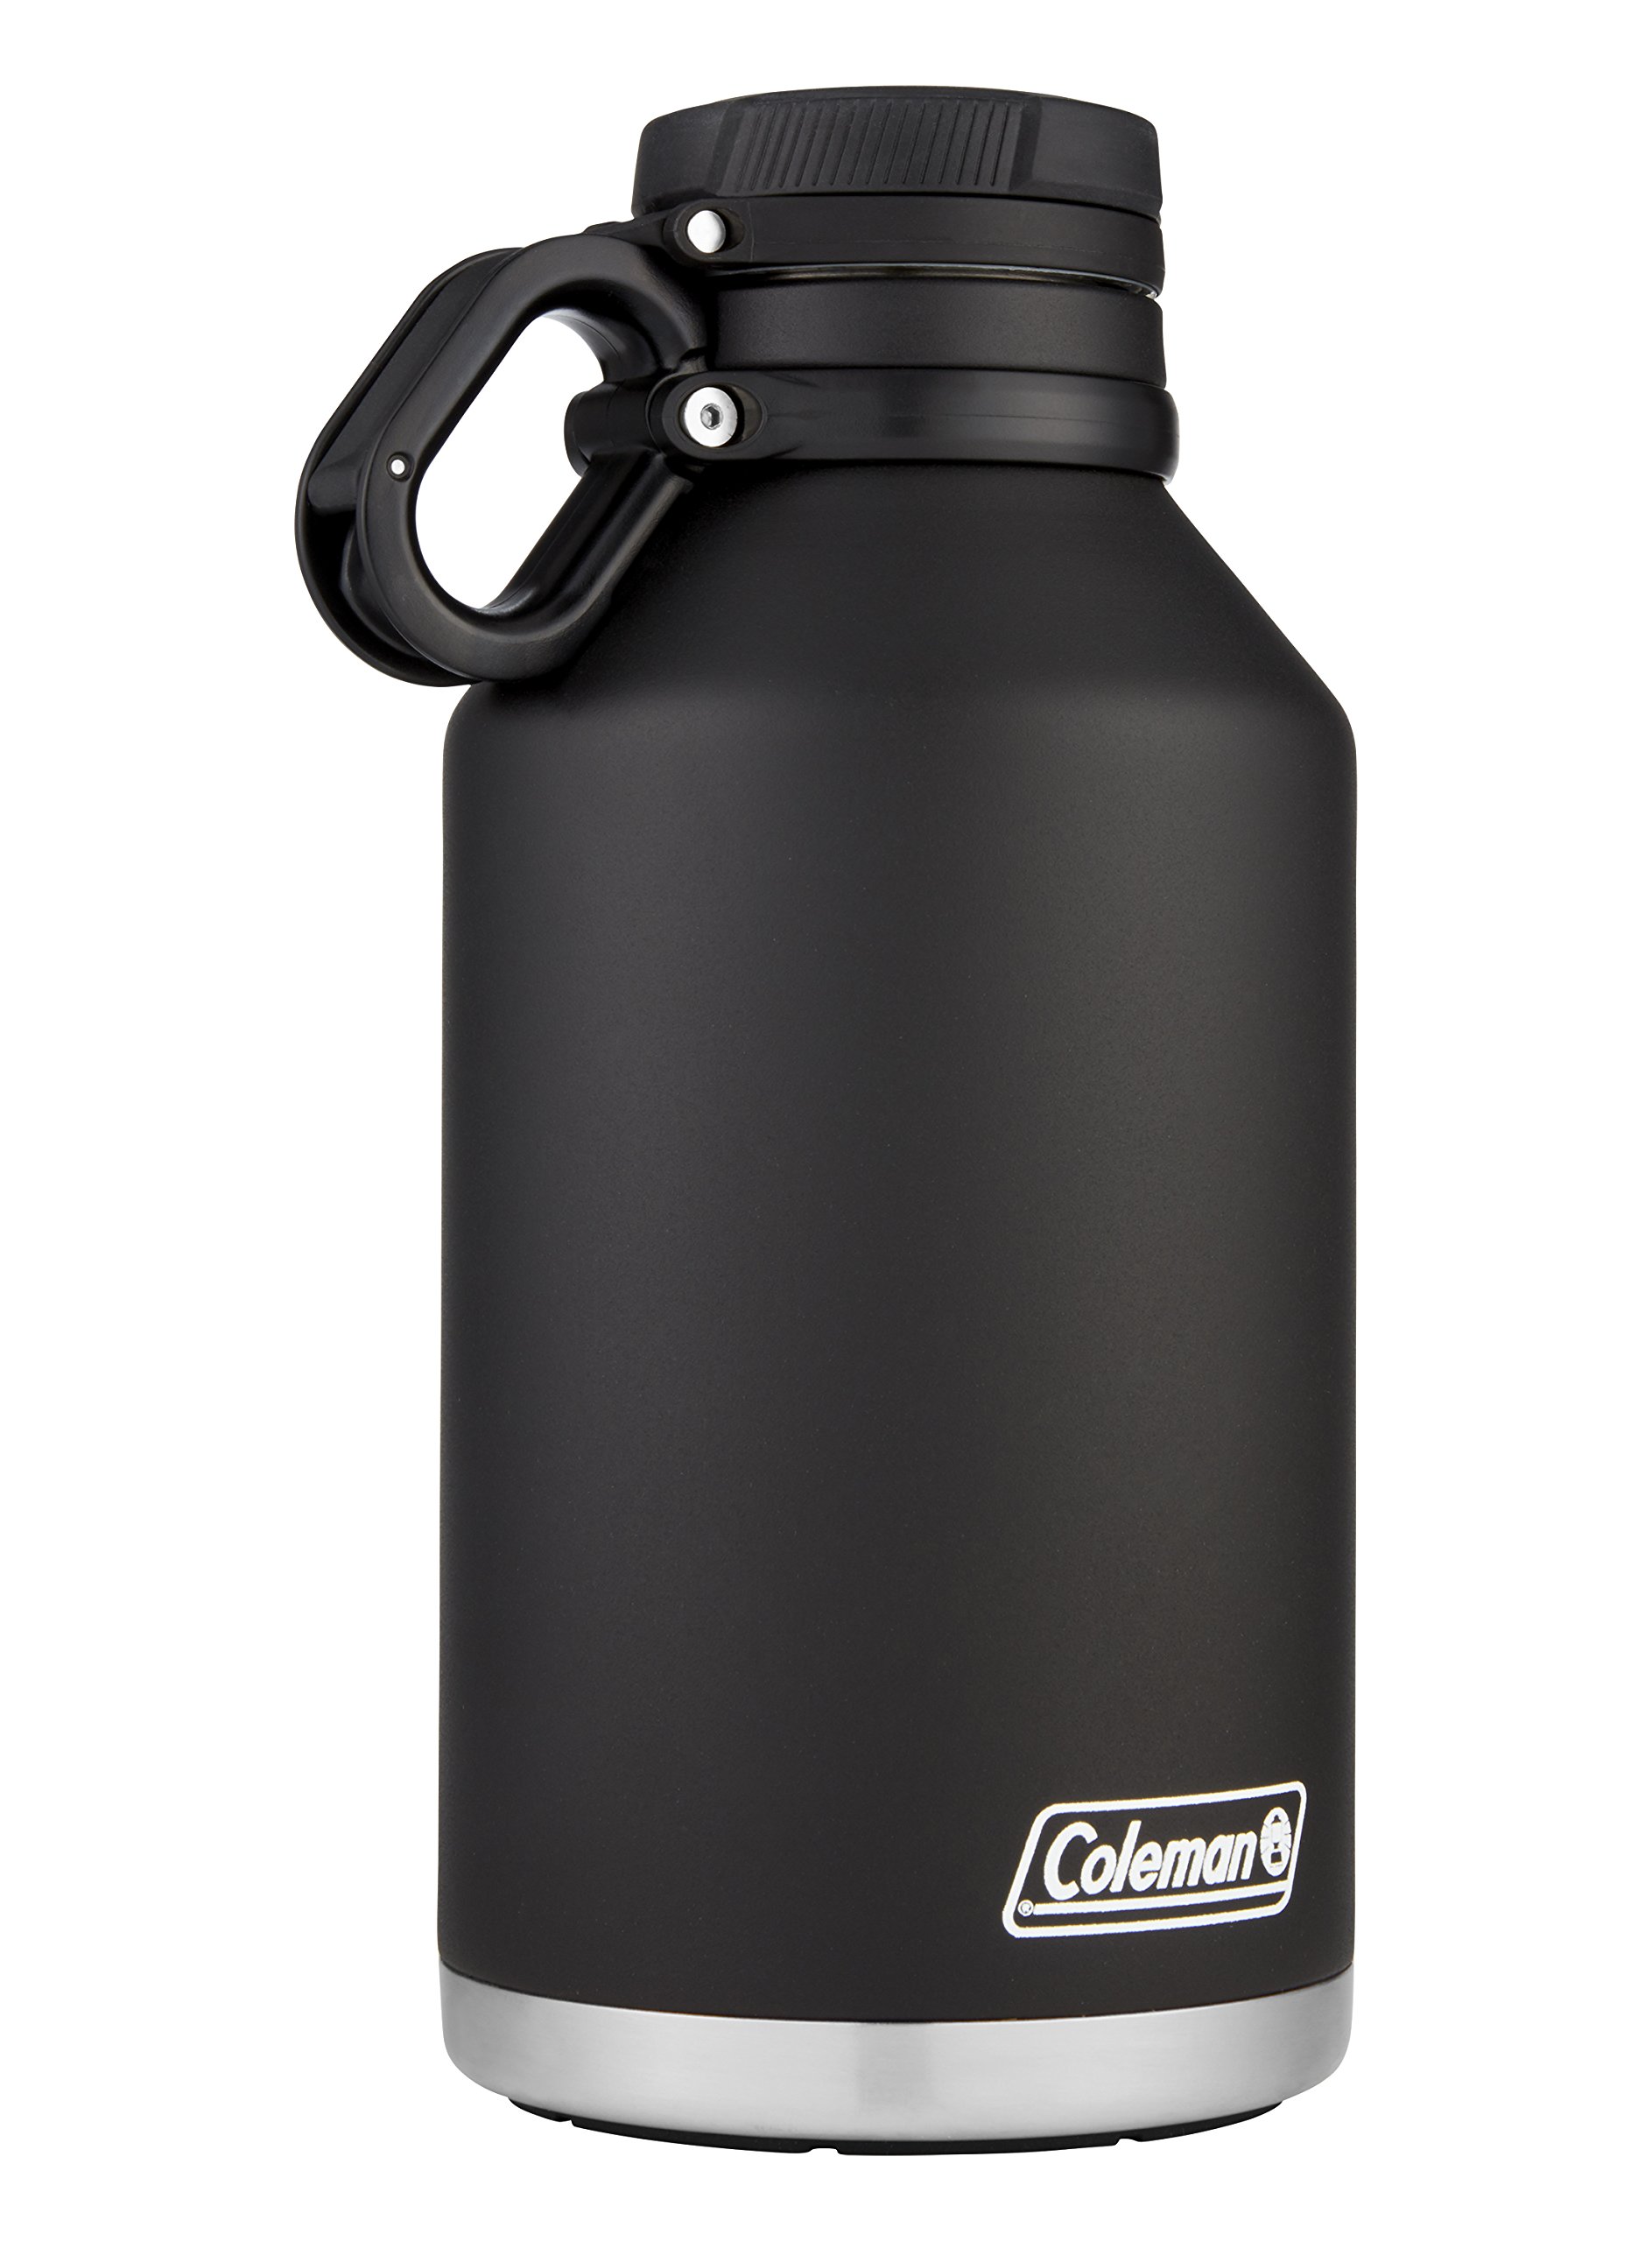 64-Oz Coleman Insulated Stainless Steel Growler (Black) $20 + Free Shipping w/ Prime or on $35+